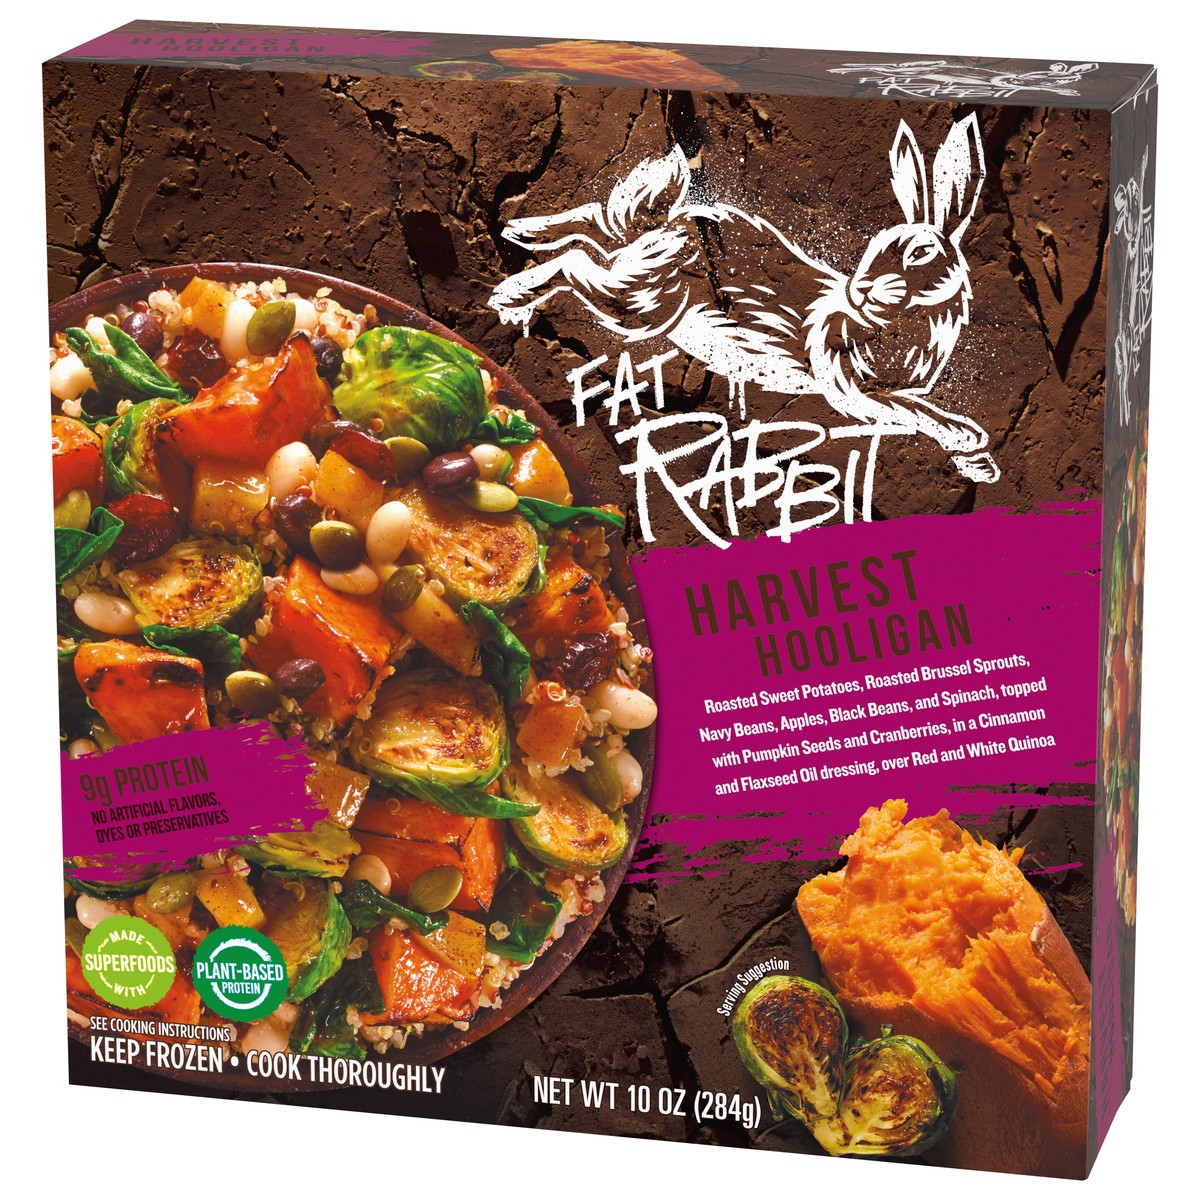 slide 6 of 13, Fat Rabbit Harvest Hooligan with Roasted Vegetables, Fruit & Pumpkin Seeds in Cinnamon & Flaxseed Oil Dressing over Quinoa Frozen Meal, 10 oz Box, 10 oz